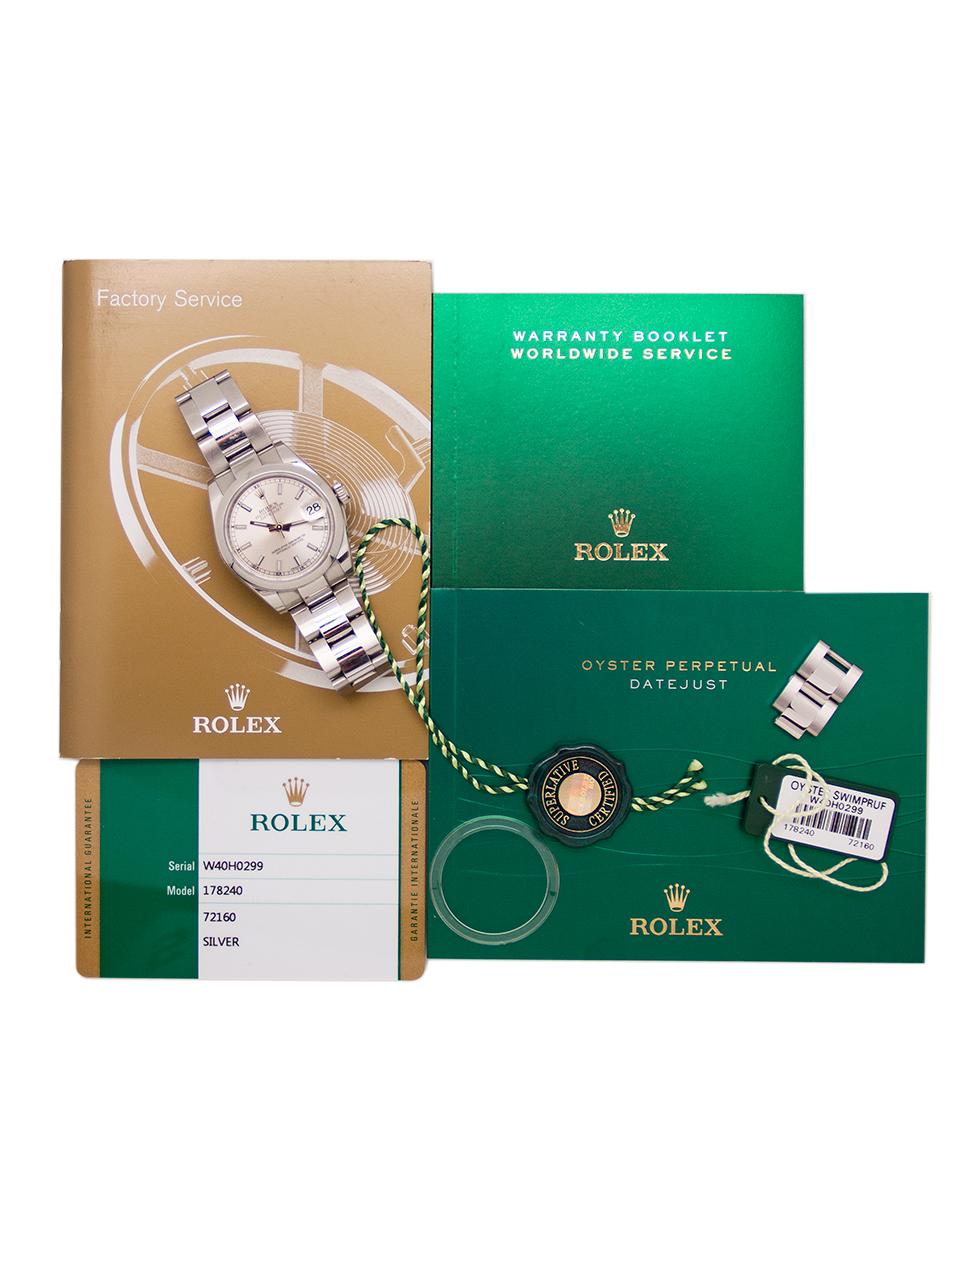 Rolex Stainless Steel Lady Rolex Datejust self winding Wristwatch 178240, c 2015 For Sale 1